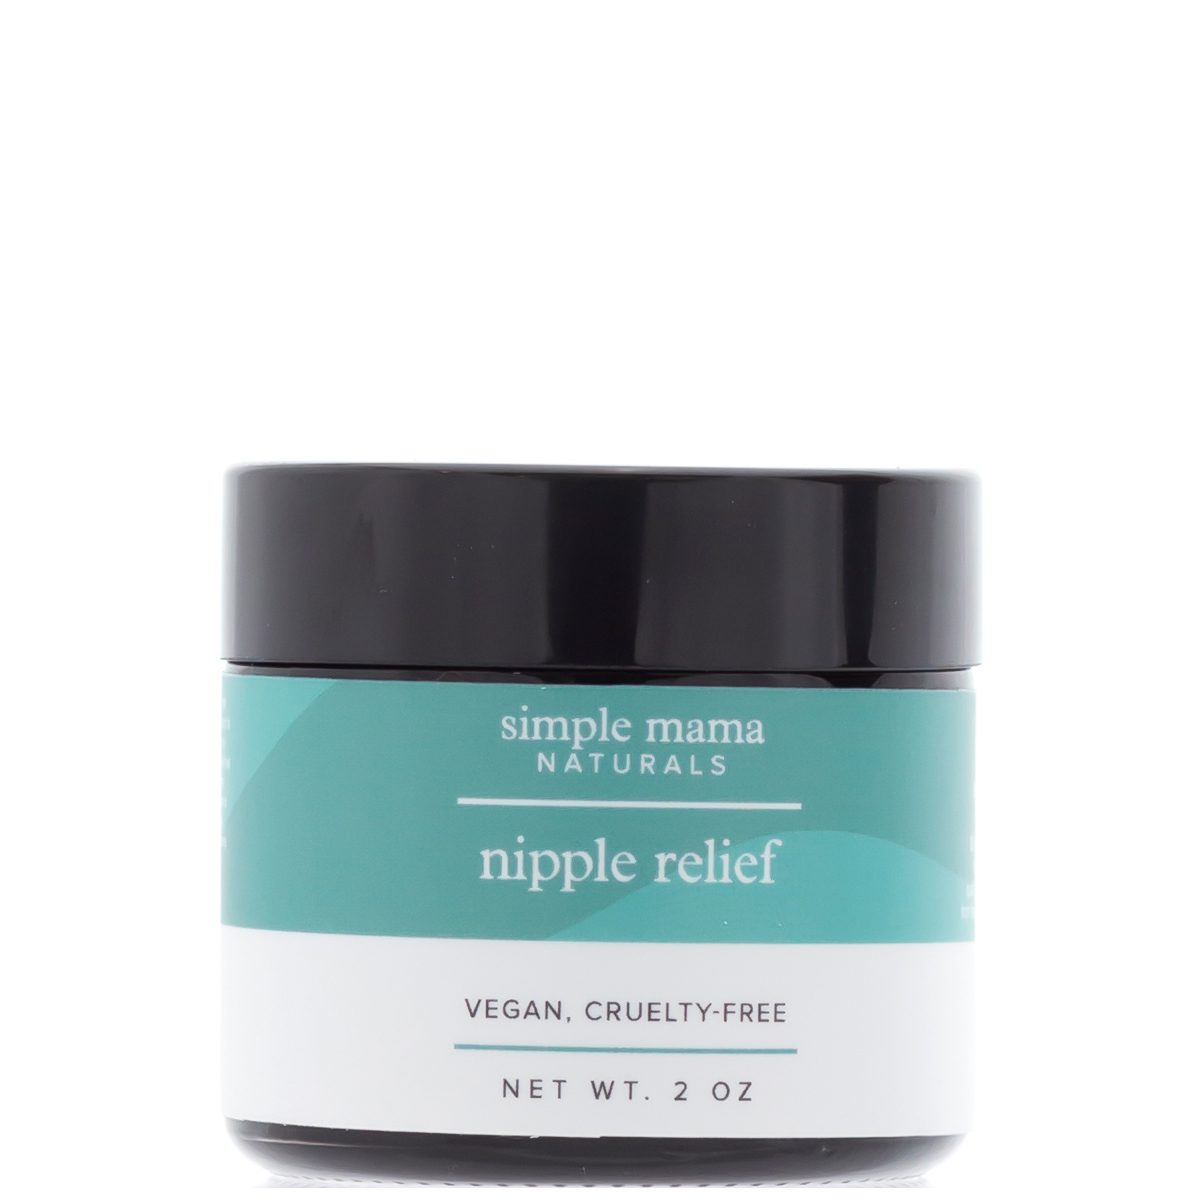 https://simplebodyproducts.com/wp-content/uploads/2022/06/Nipple_Relief_2oz_01.jpg